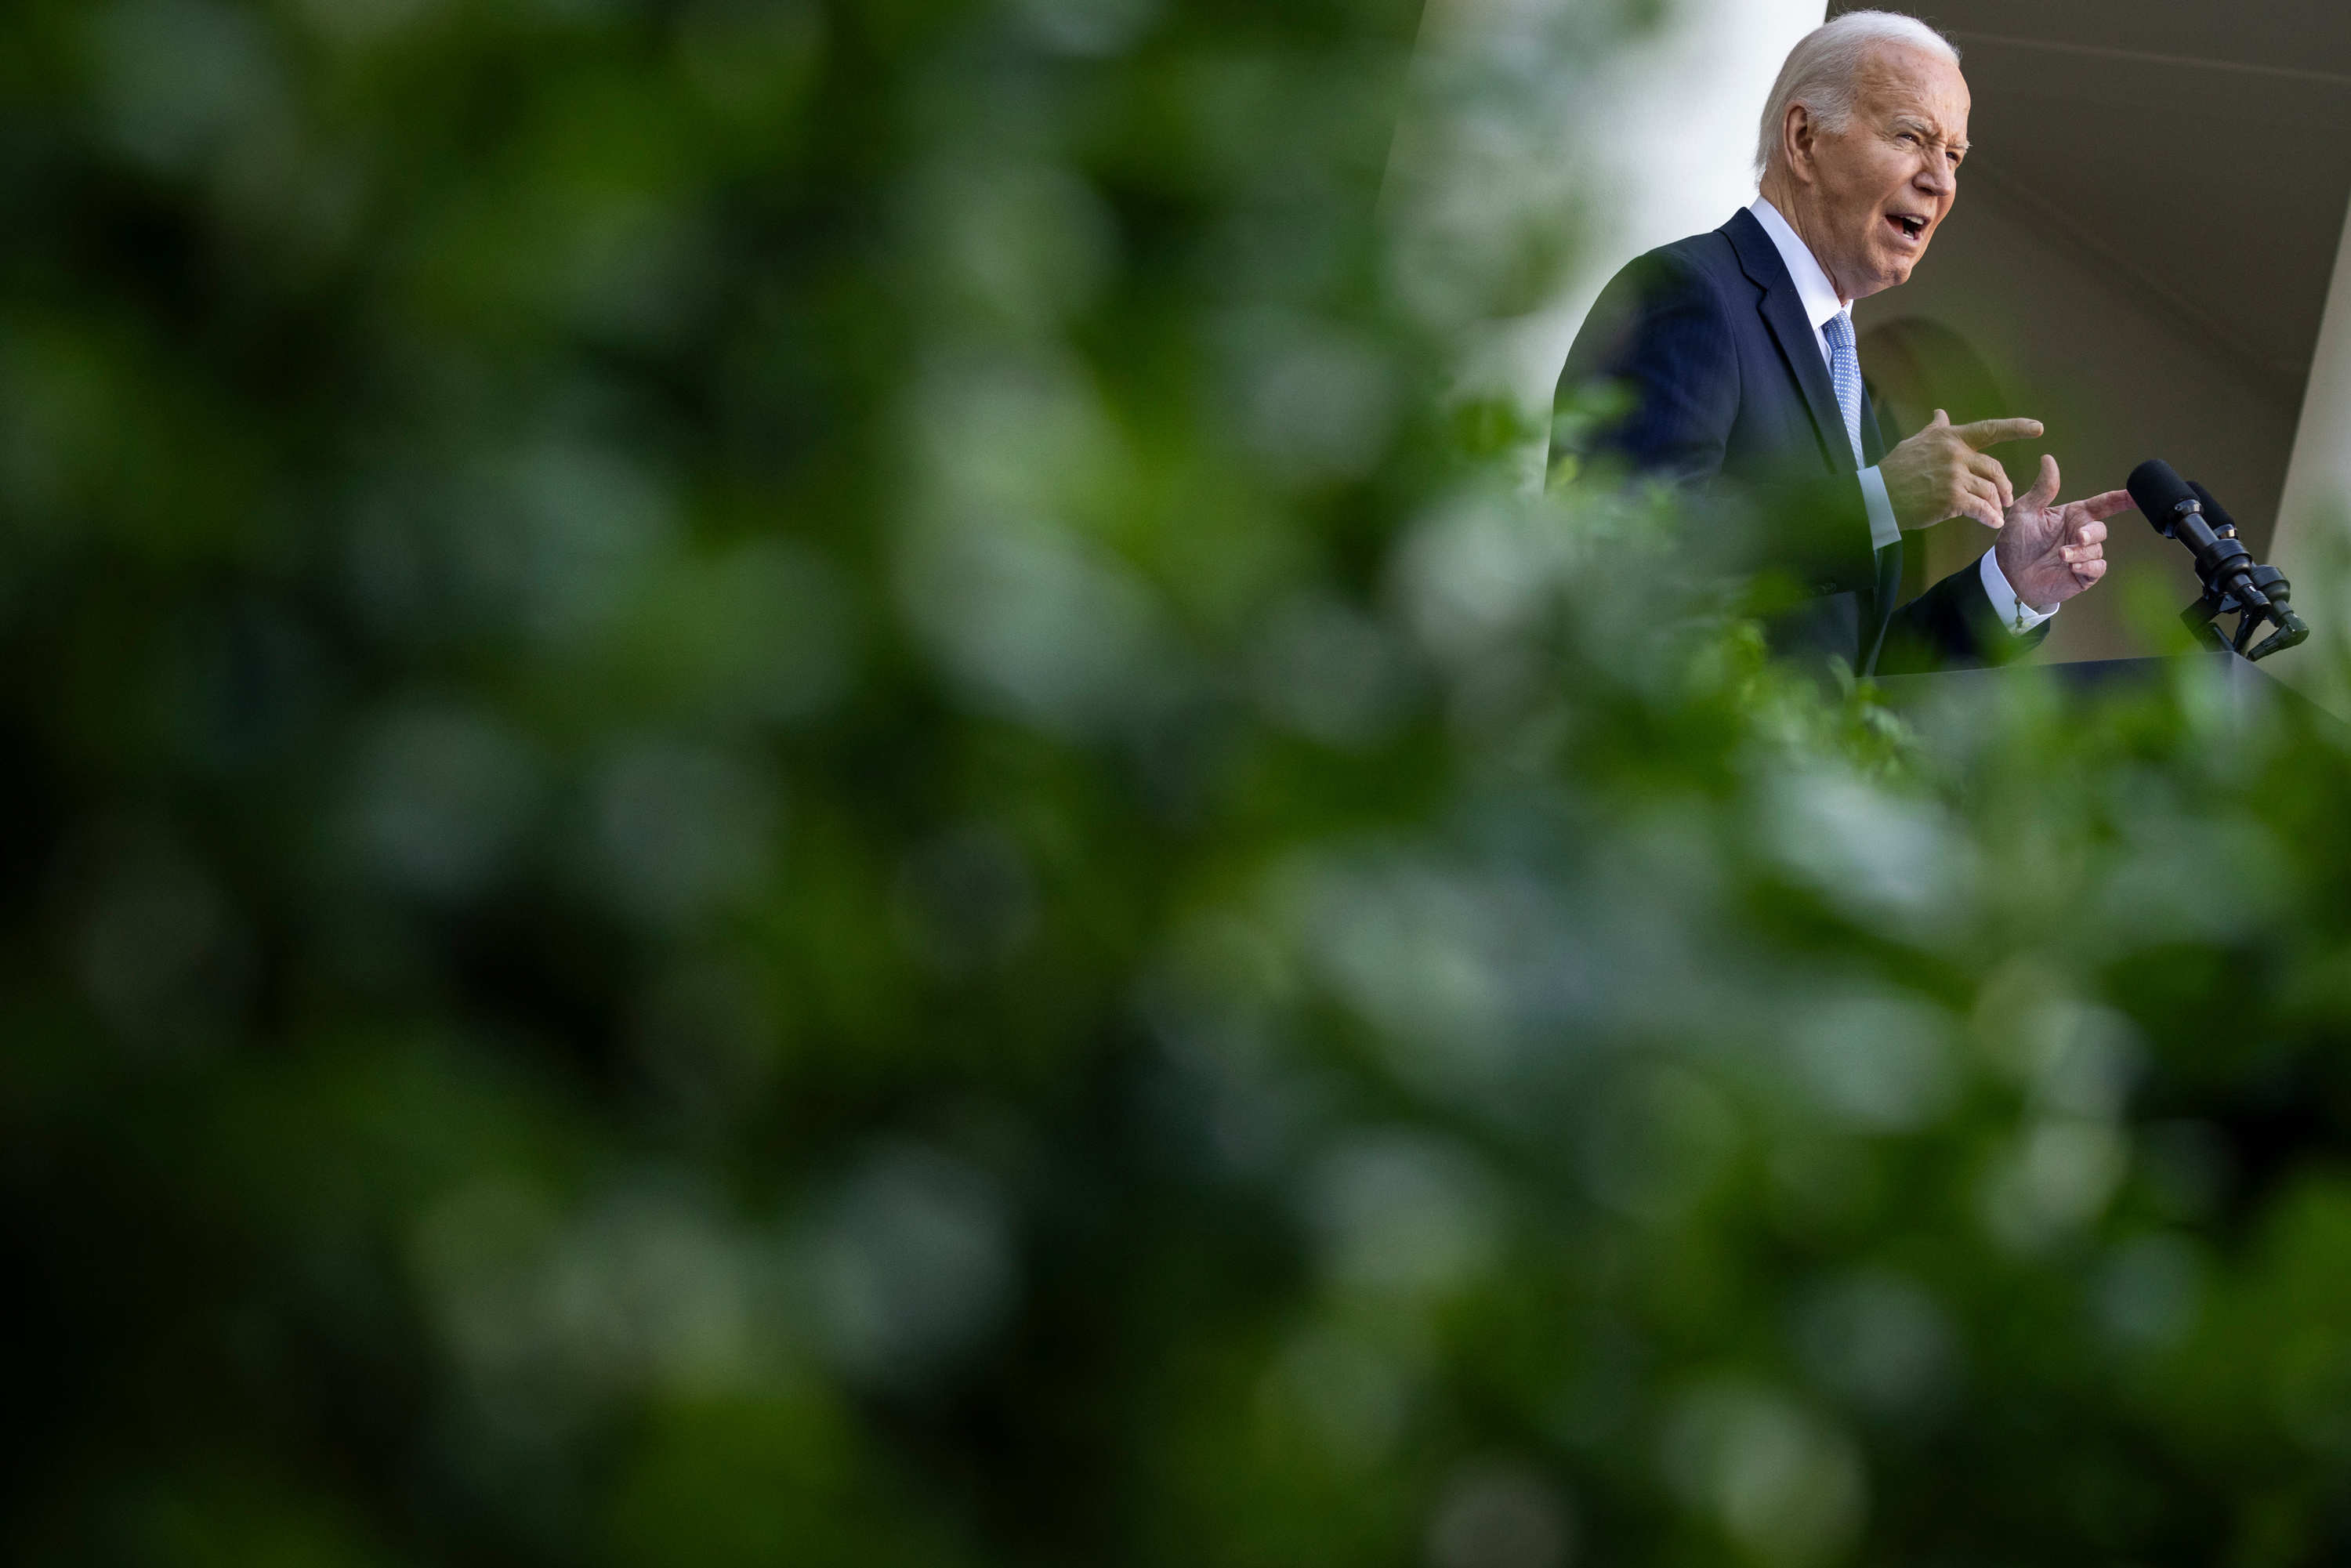 Joe Biden speaks during a Jewish American Heritage Month reception in the Rose Garden of the White House in Washington, DC, on Monday.